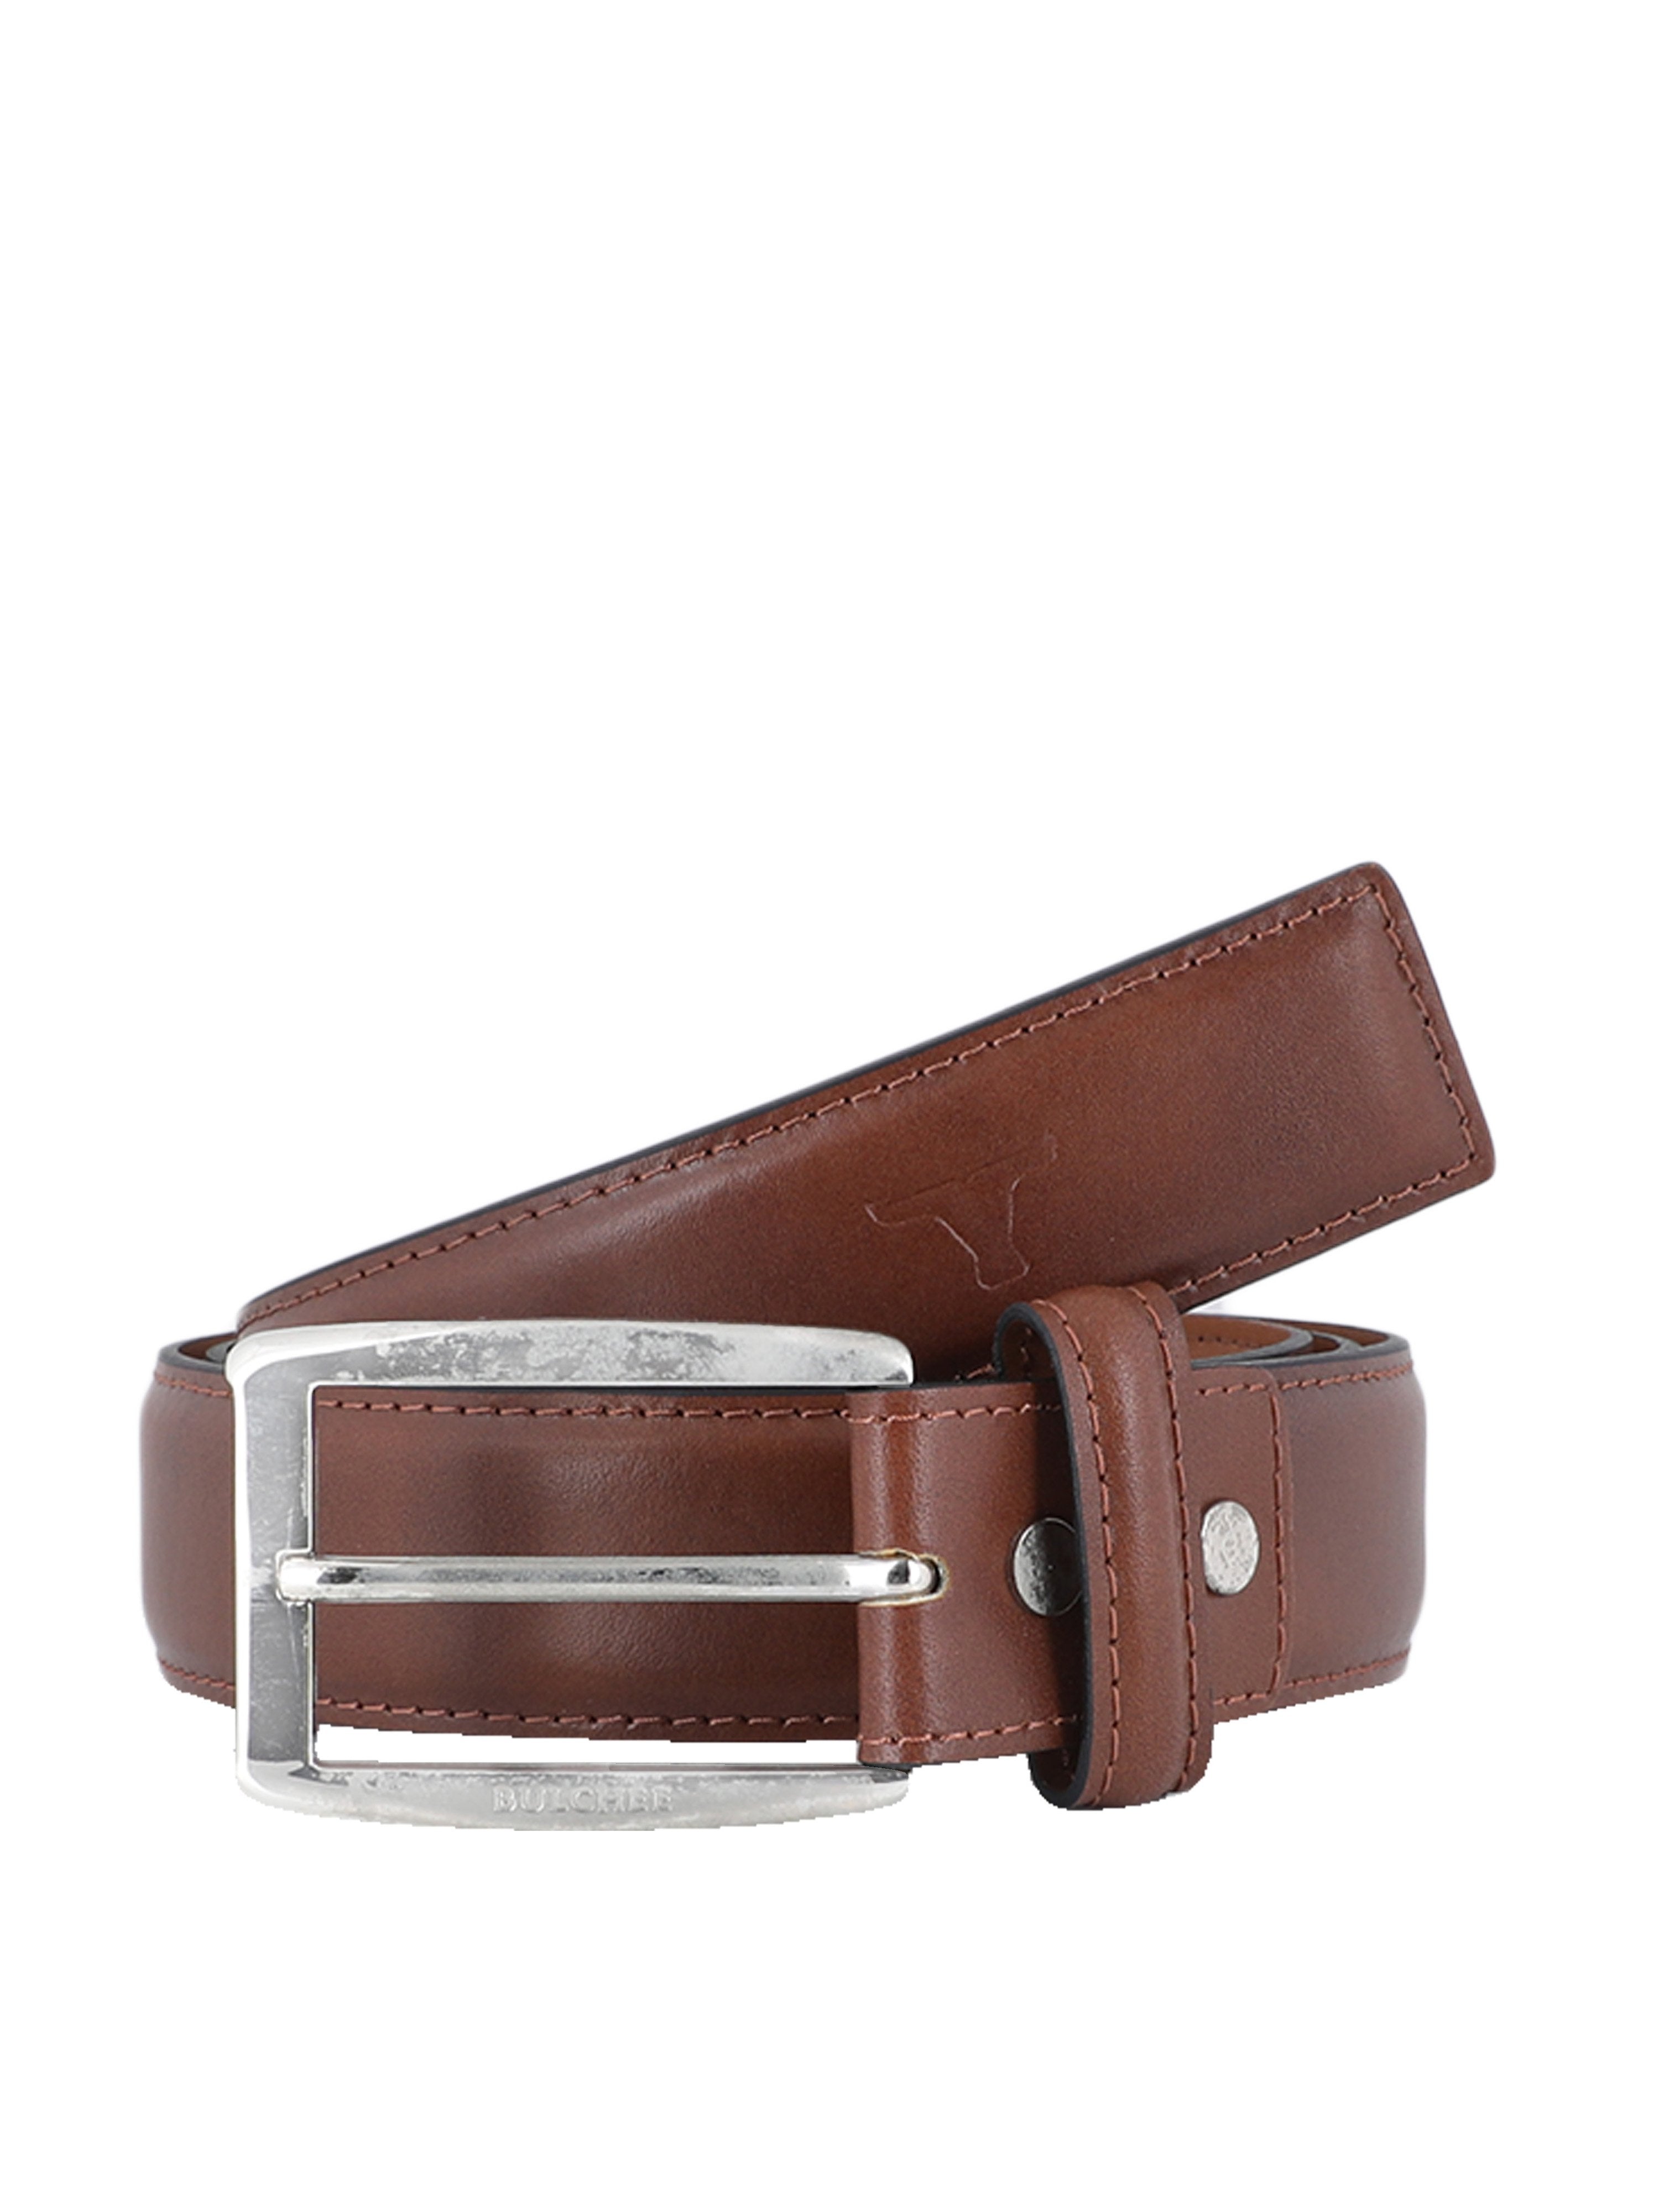 Bulchee Exclusive Insignia Collection Men's Genuine Leather Belt | Padded Chinos | Tan | BISG705B